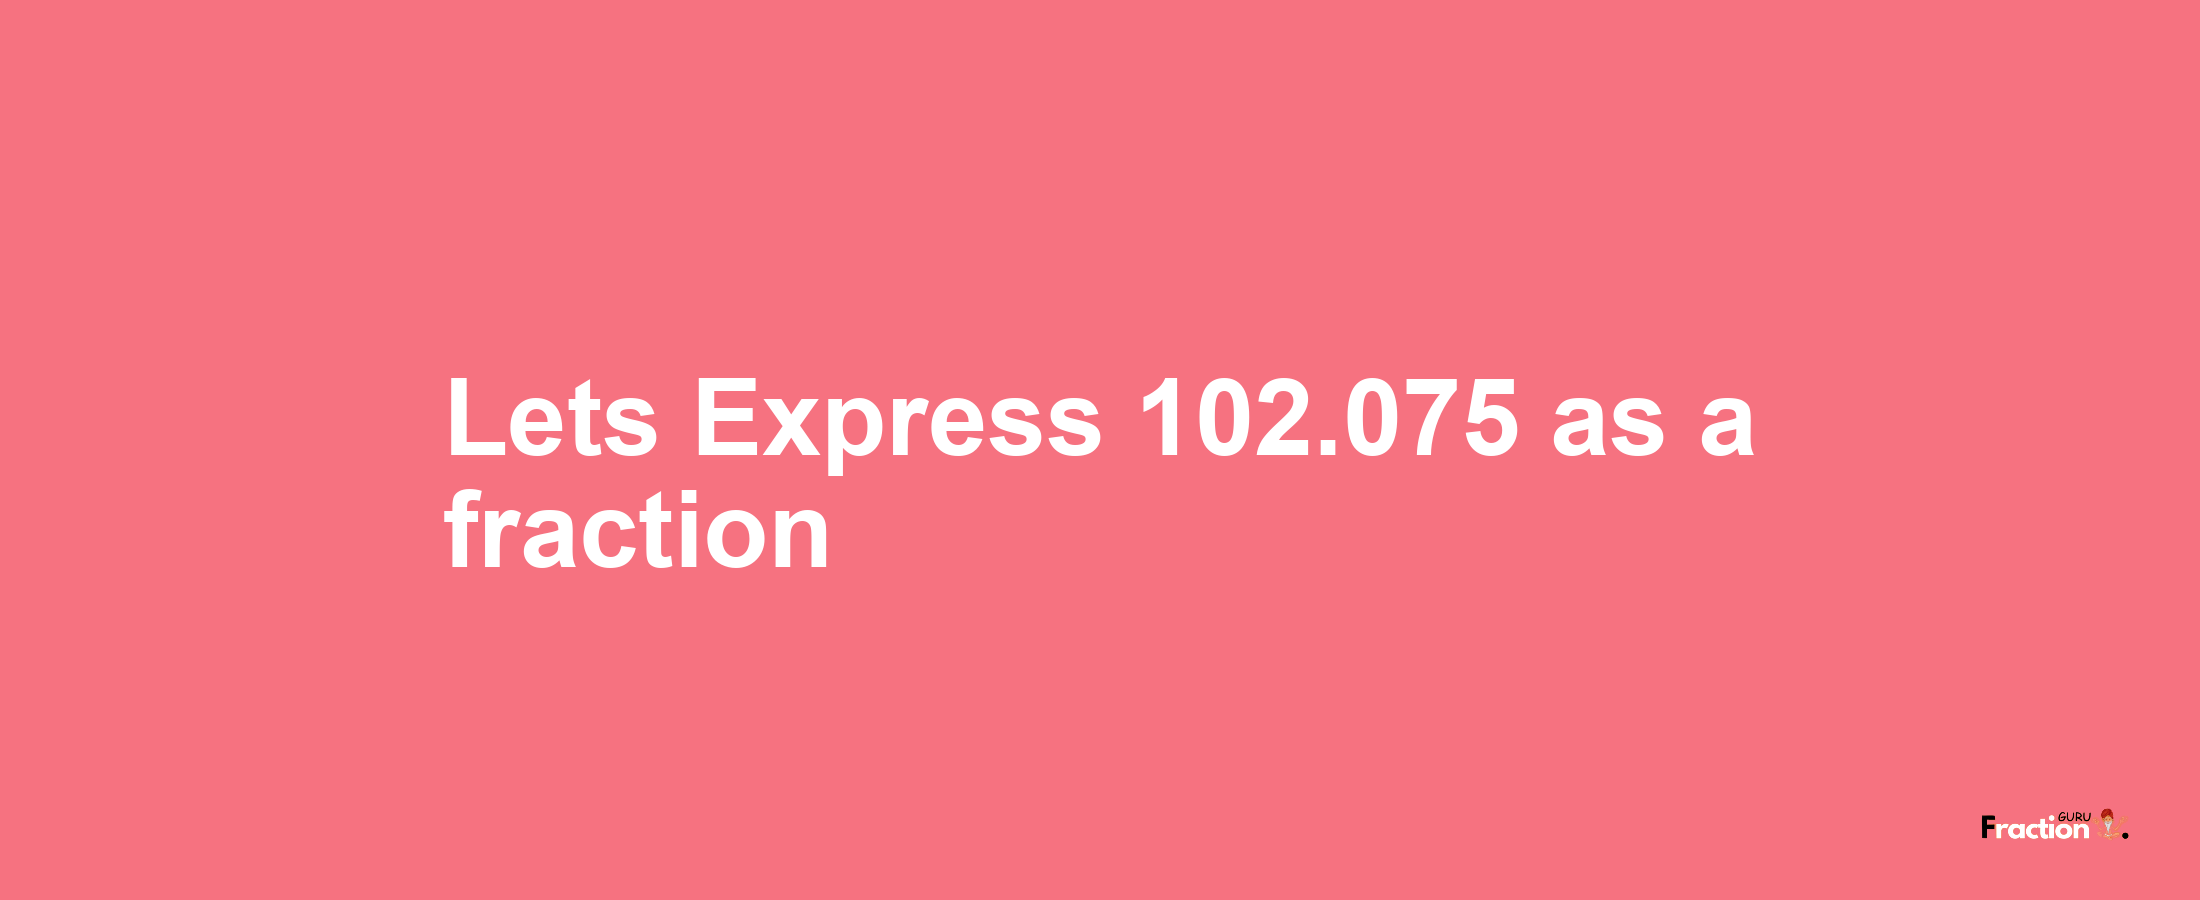 Lets Express 102.075 as afraction